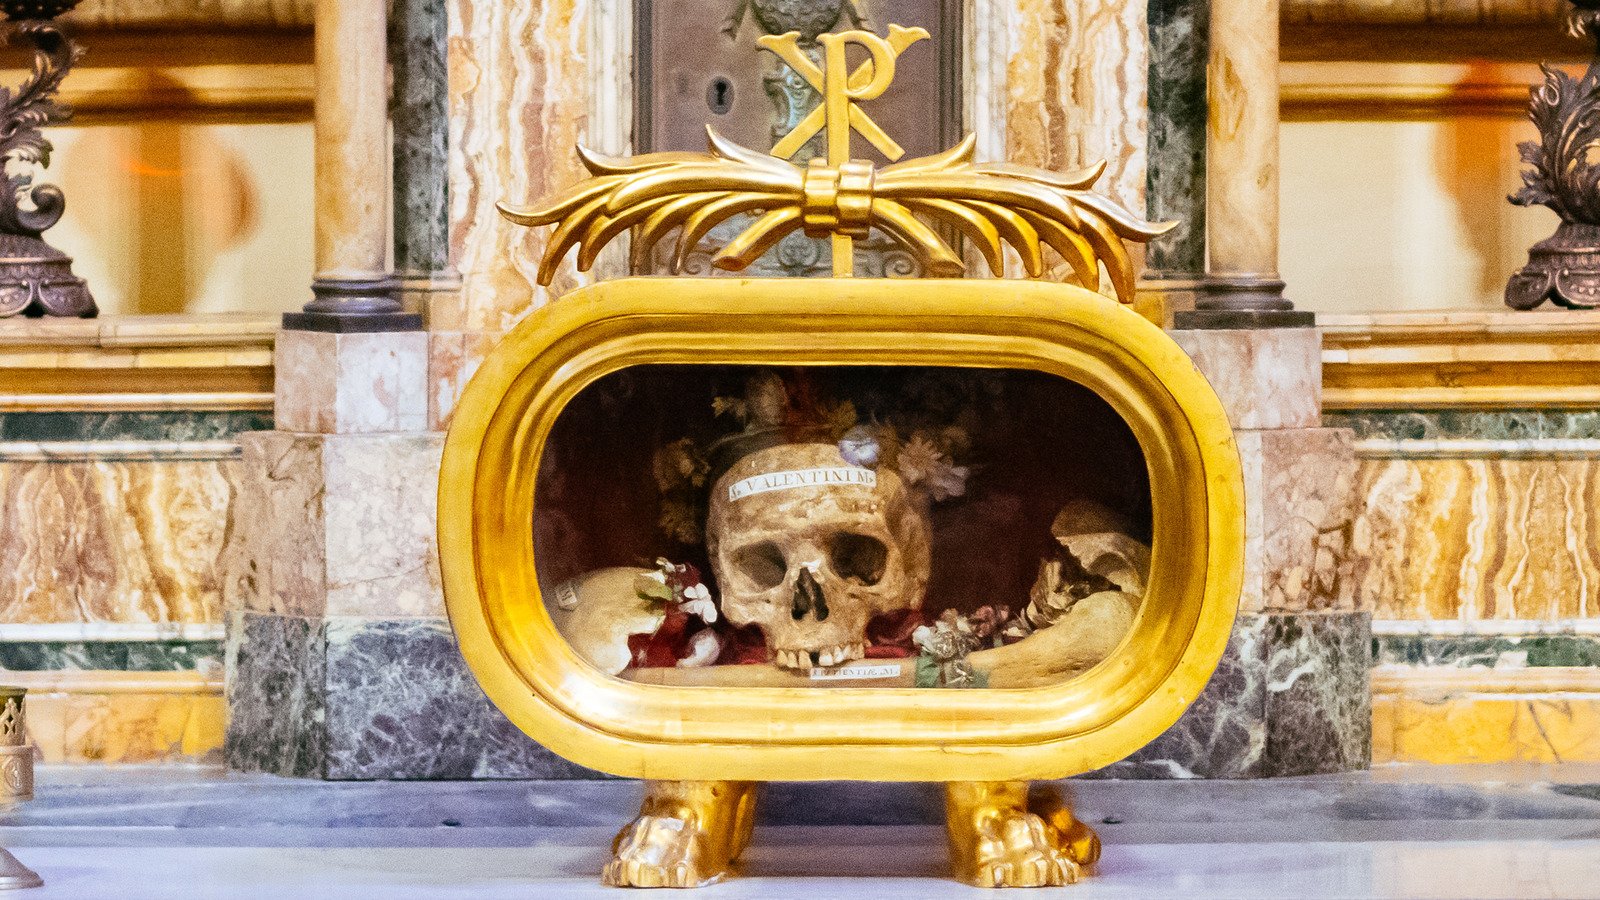 History Of The World's Most Macabre Catholic Relics Explained